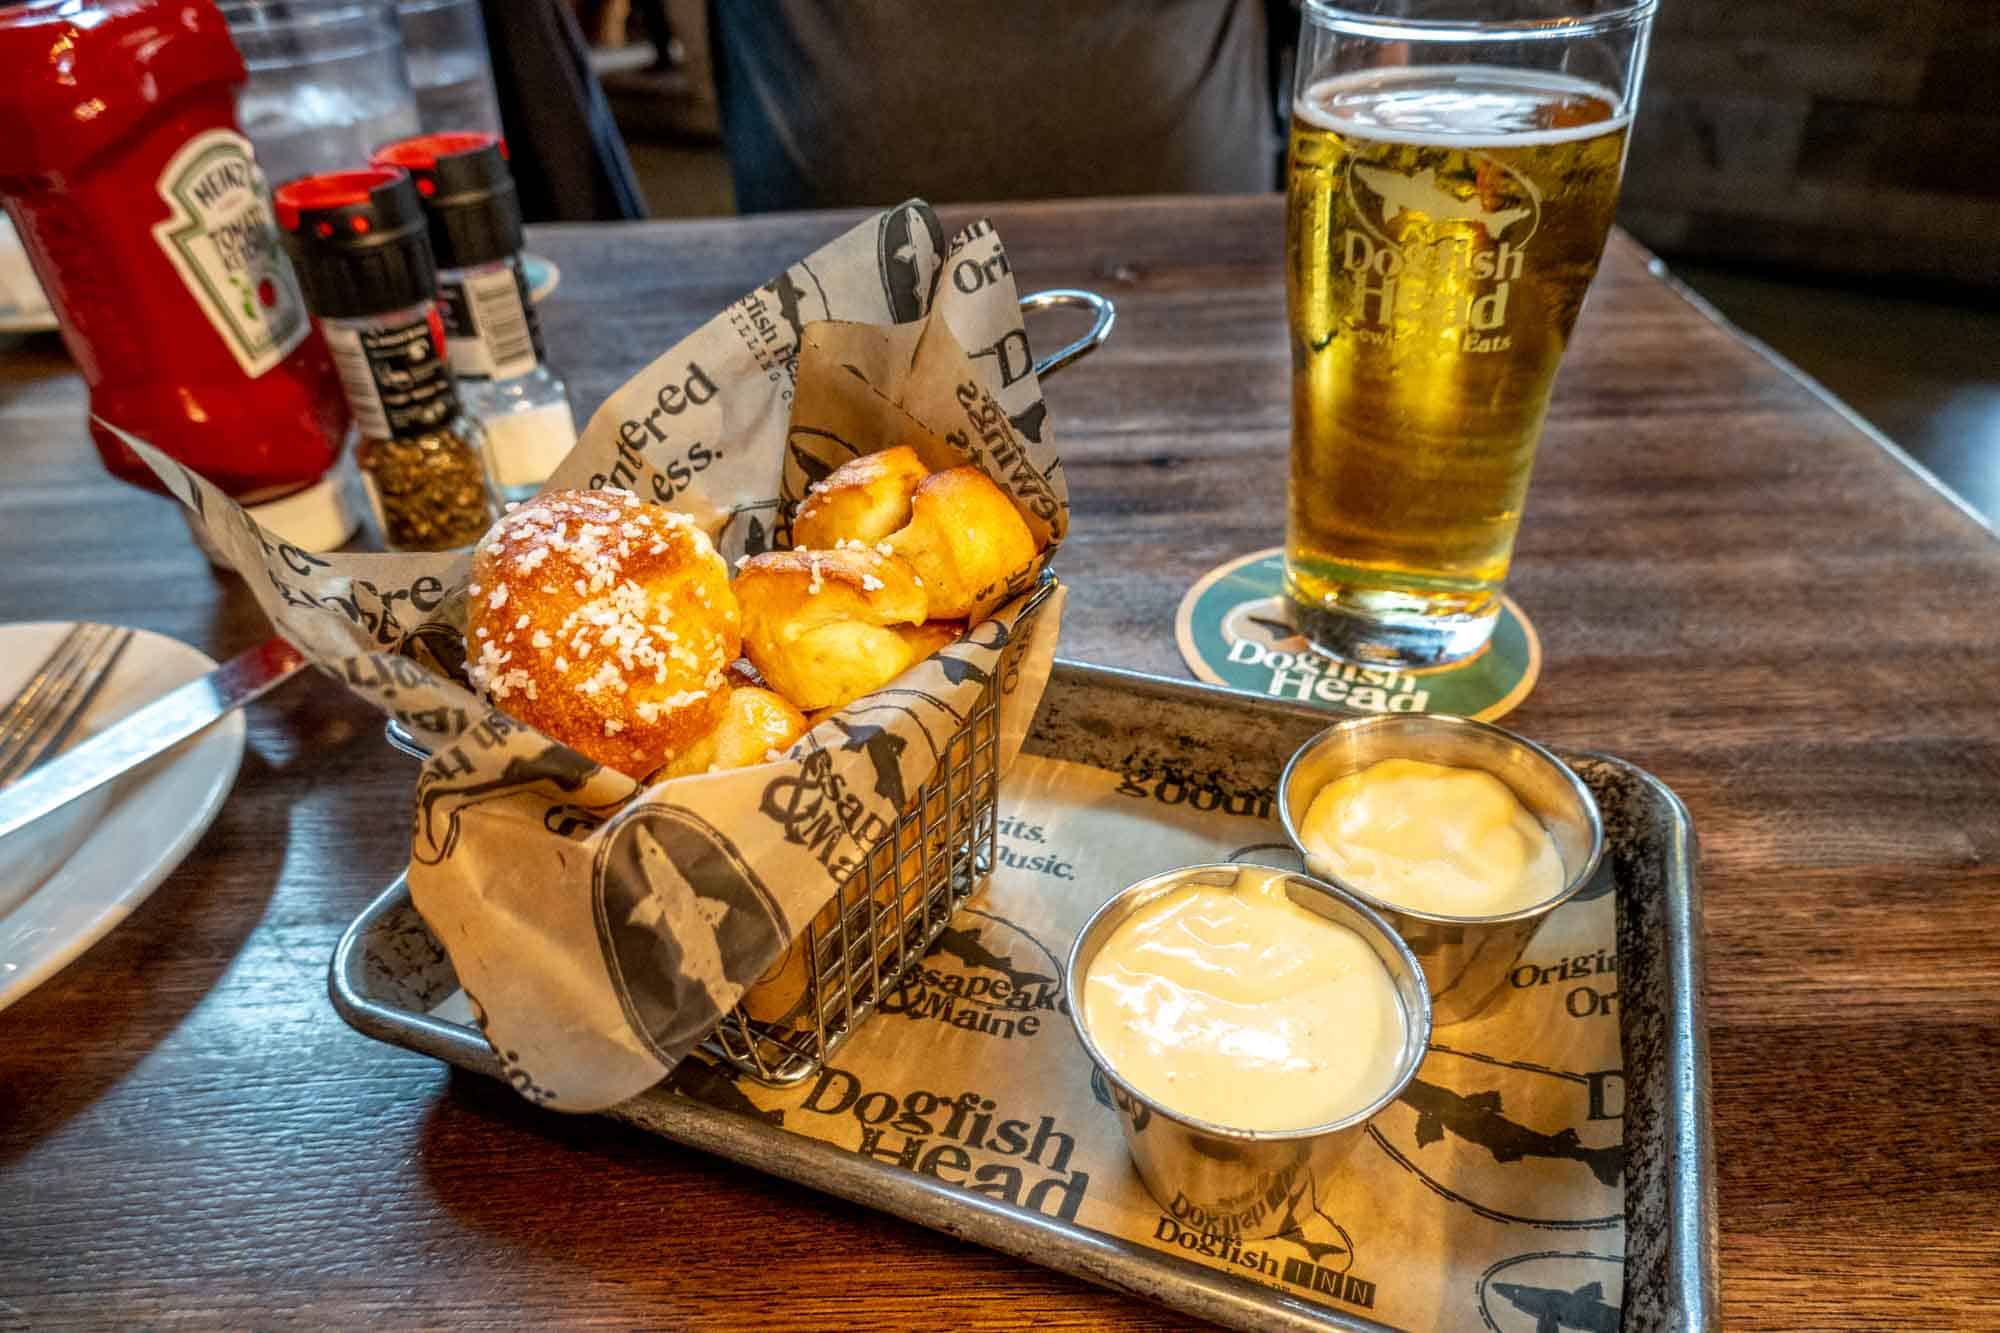 Pint of Dogfish Head beer and basket of pretzel bites on a table